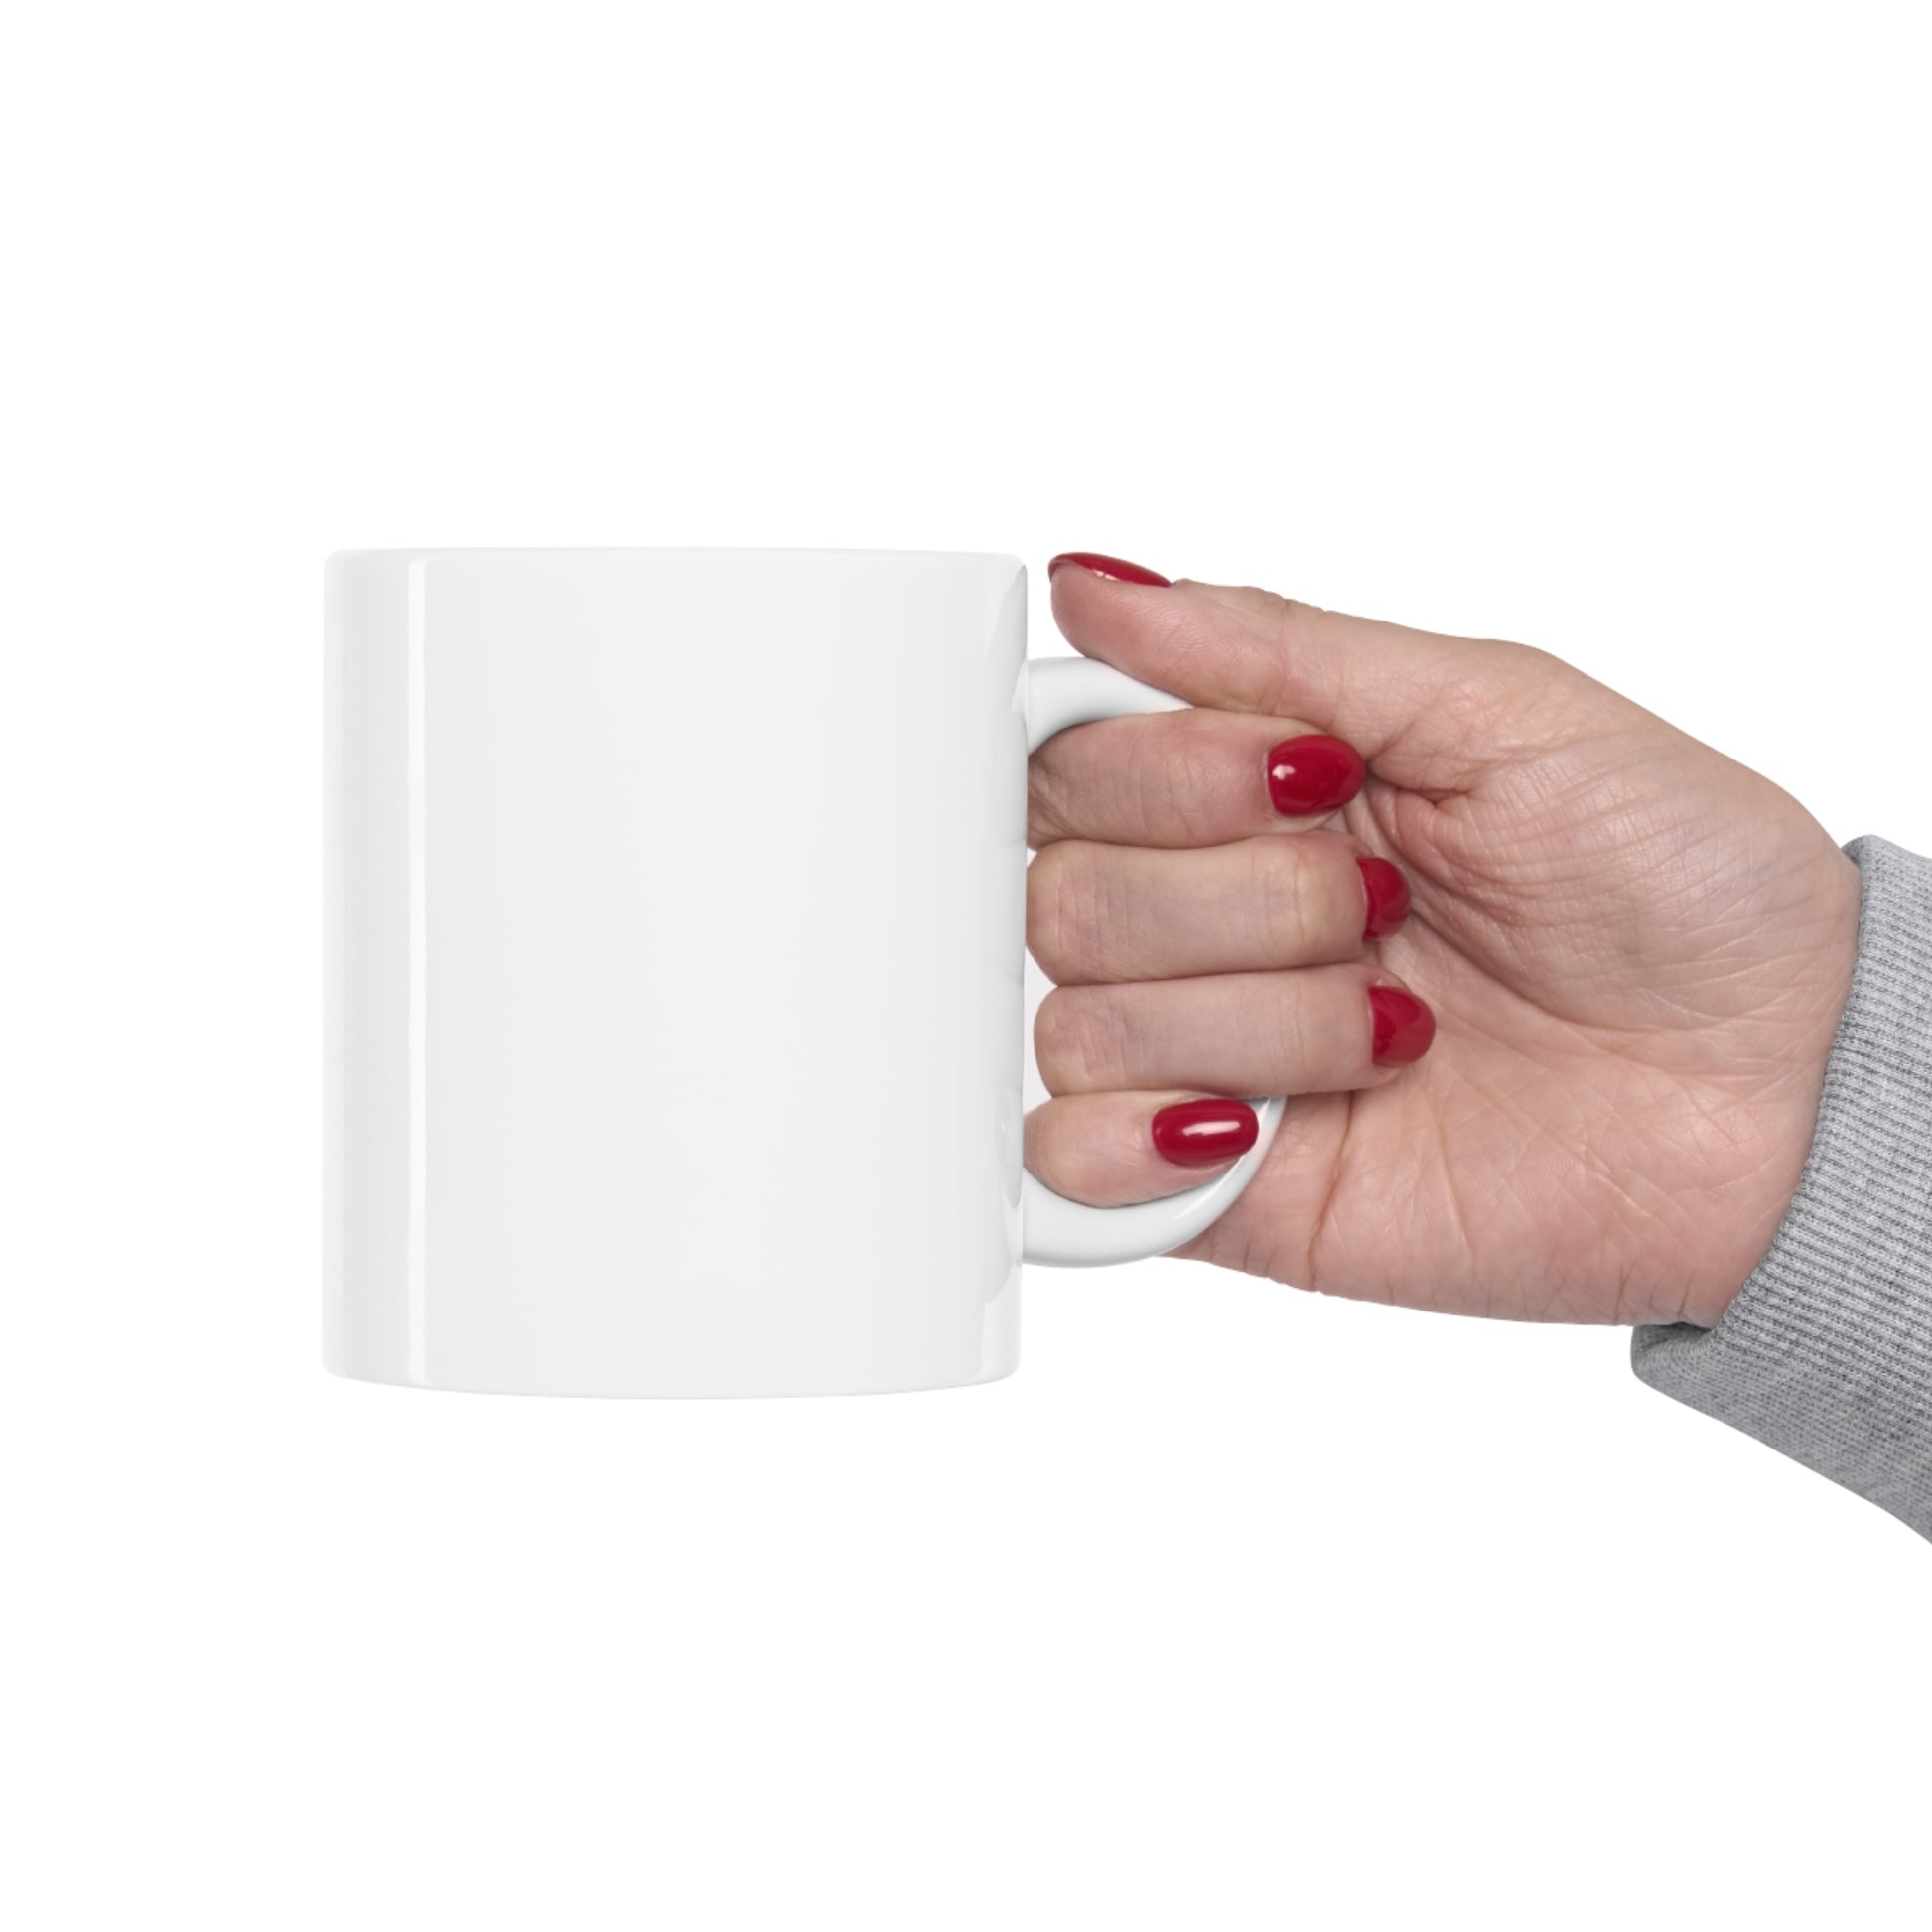 "No Need To Repeat Yourself" Sassy Coffee Mug - Weave Got Gifts - Unique Gifts You Won’t Find Anywhere Else!